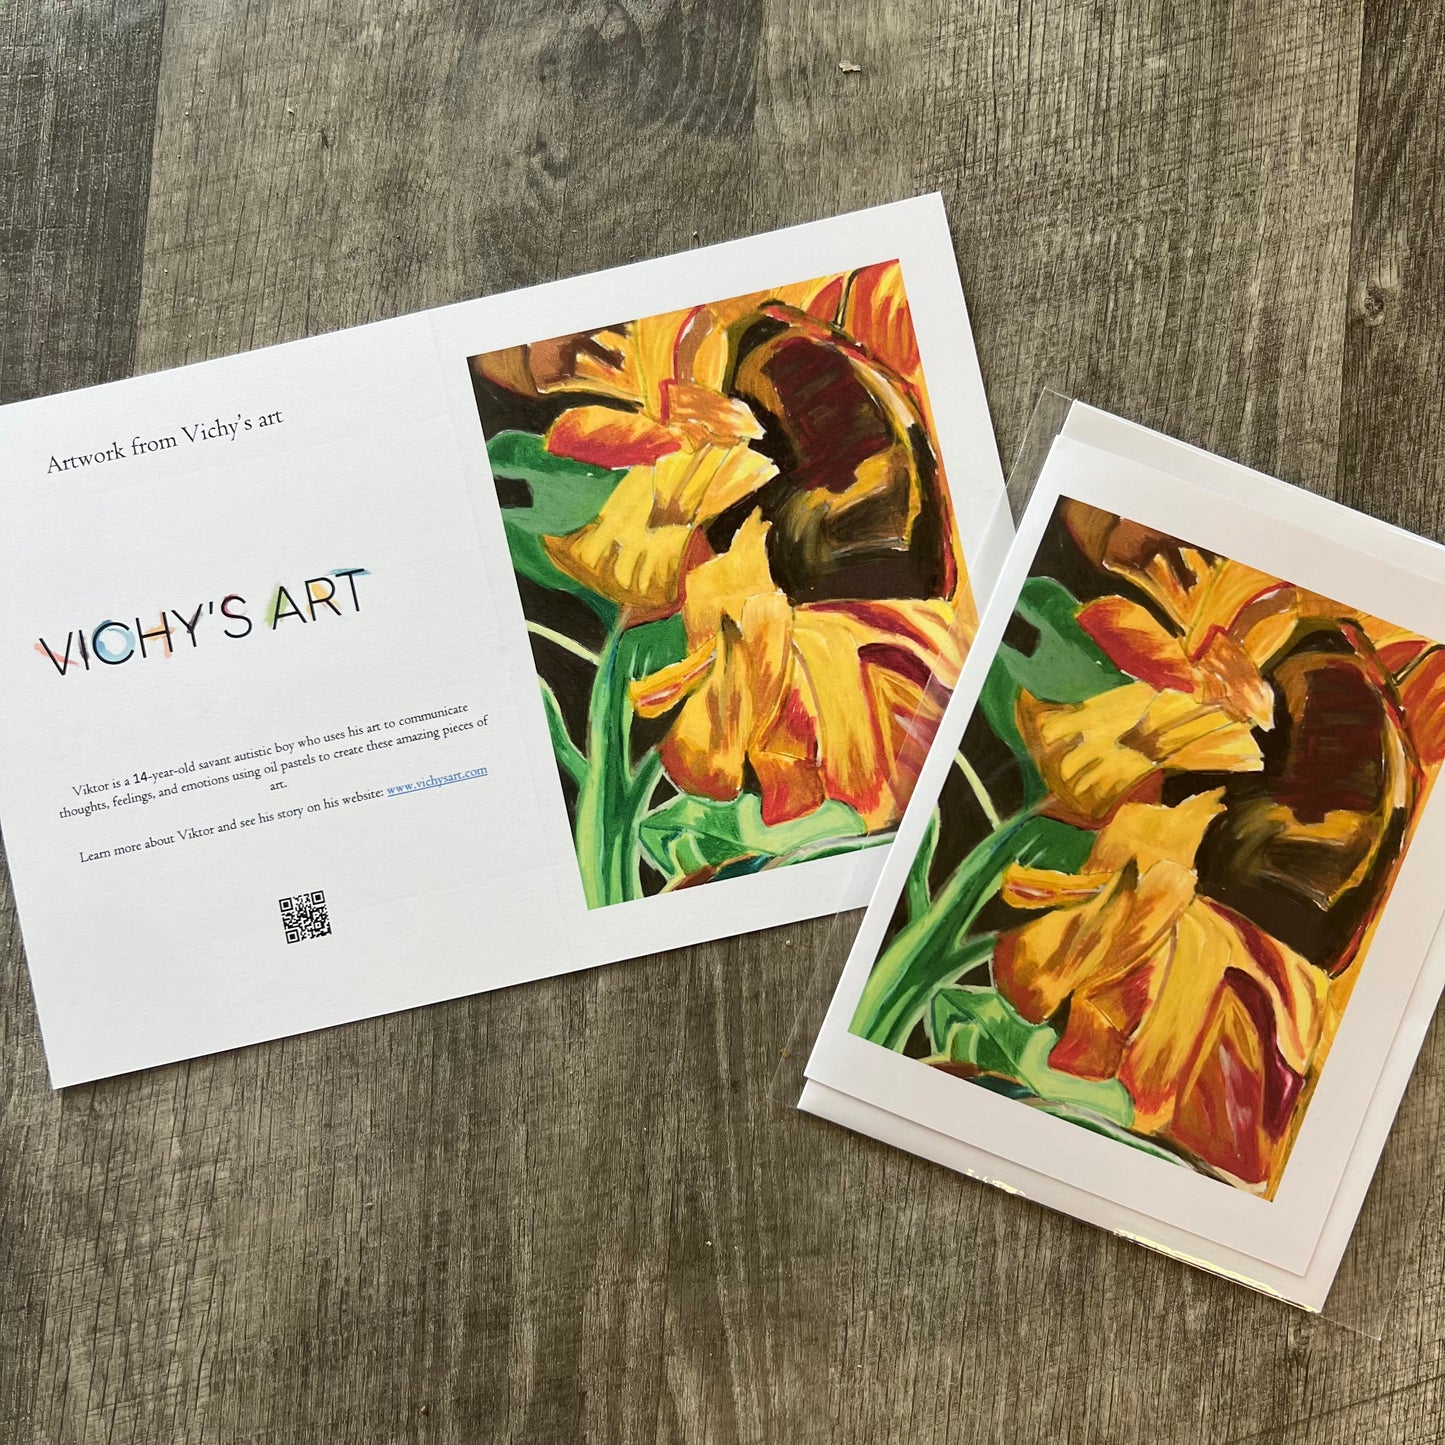 Sunflower Sunrise - Greeting card in size 6.5x10” with mat finish